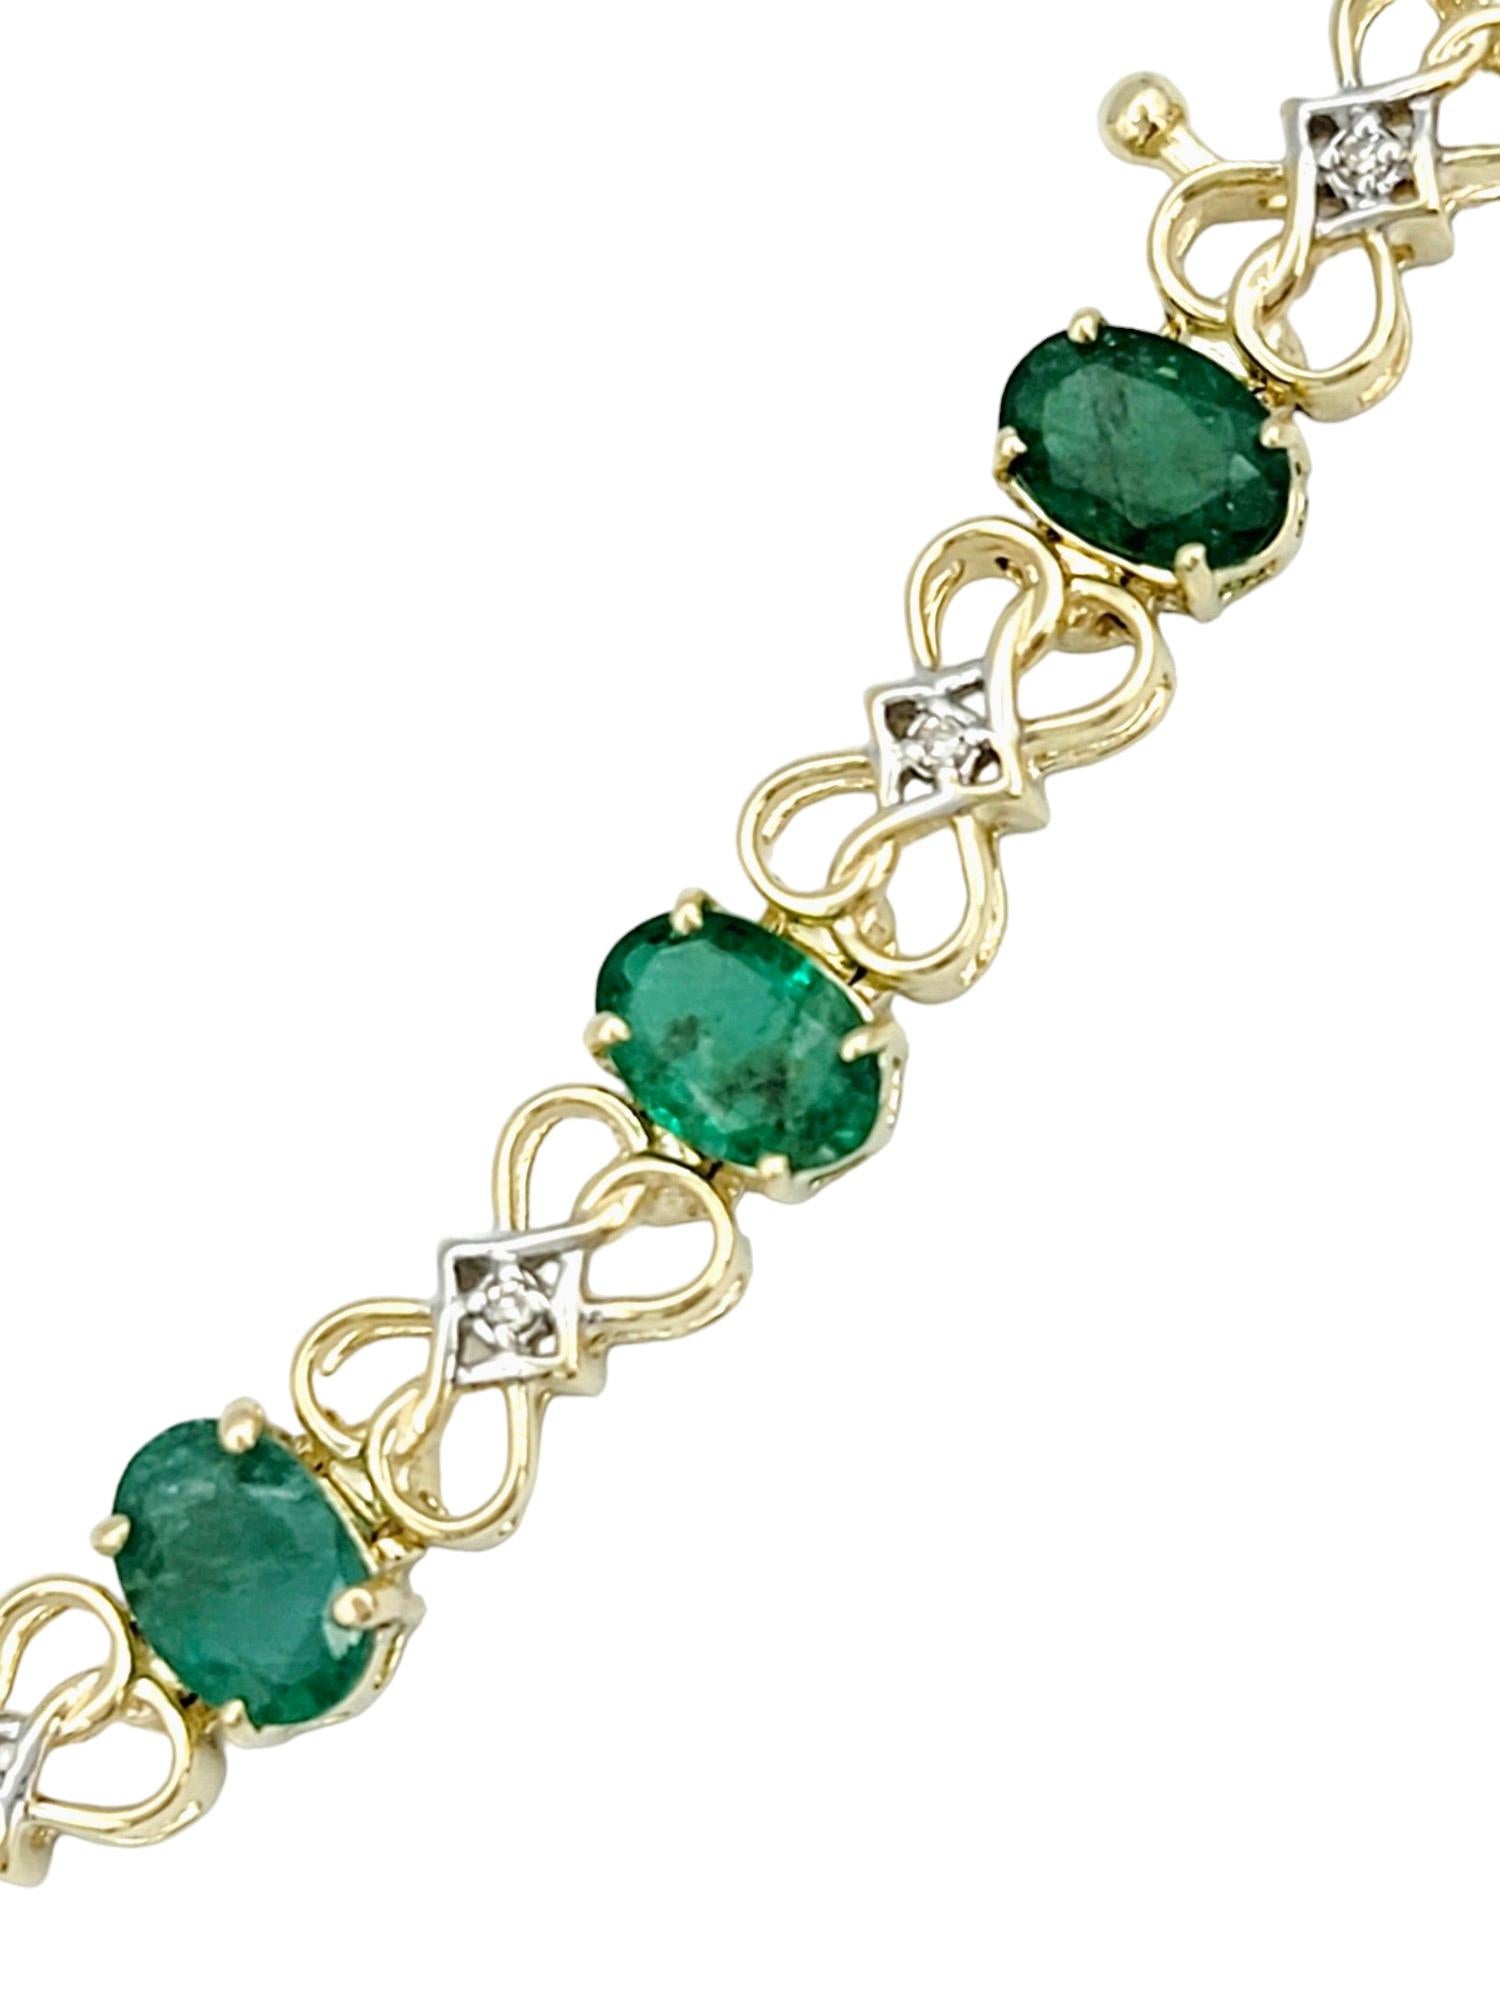 This elegant 14 karat gold tennis bracelet is a breathtaking testament to the timeless allure of emeralds and diamonds. The bracelet's design is a harmonious interplay of vibrant oval emeralds, each exuding a lush green hue, and infinity loop motifs